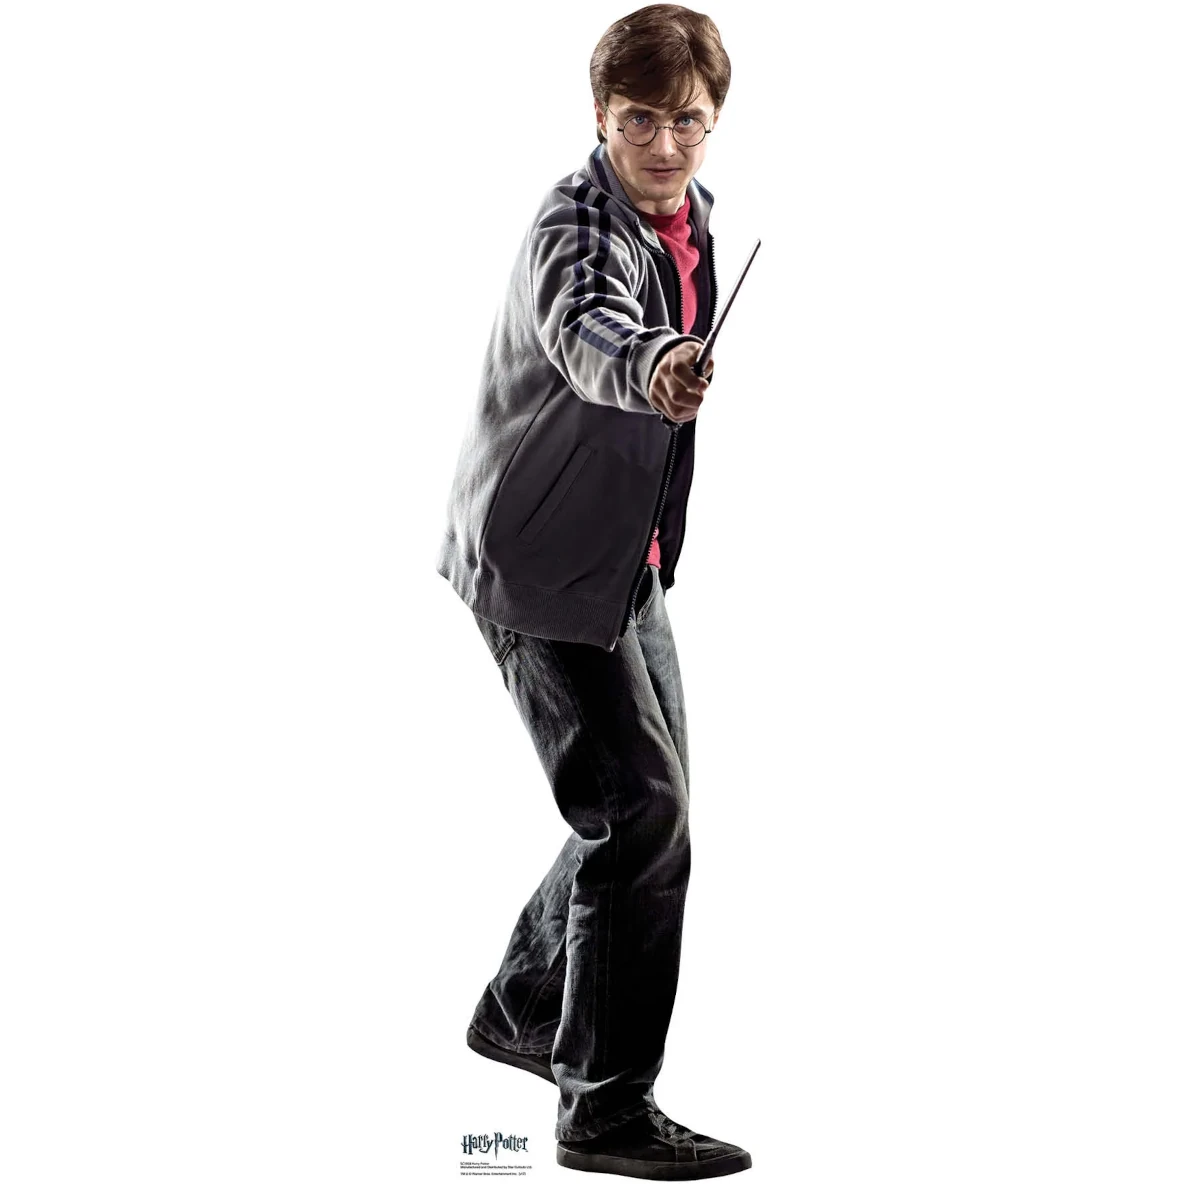 SC1958 Harry Potter 'Daniel Radcliffe' (Harry Potter) Official Mini Cardboard Cutout Standee Front